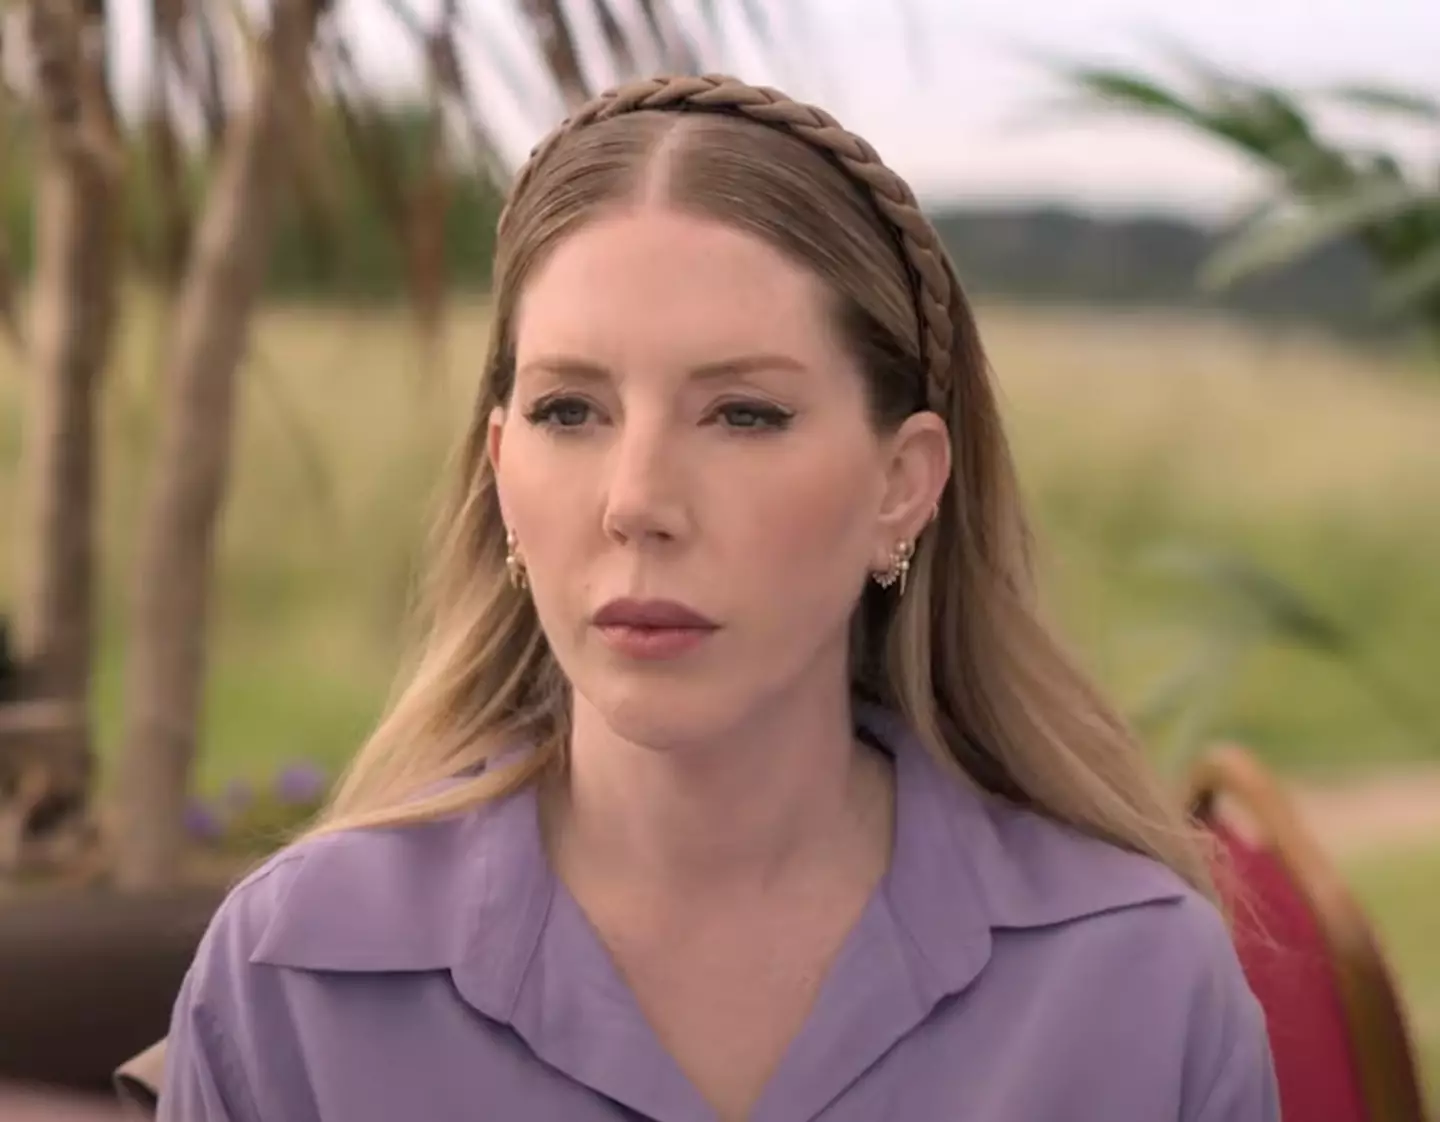 Katherine Ryan says she 'hated' the dramatic parts of the role.